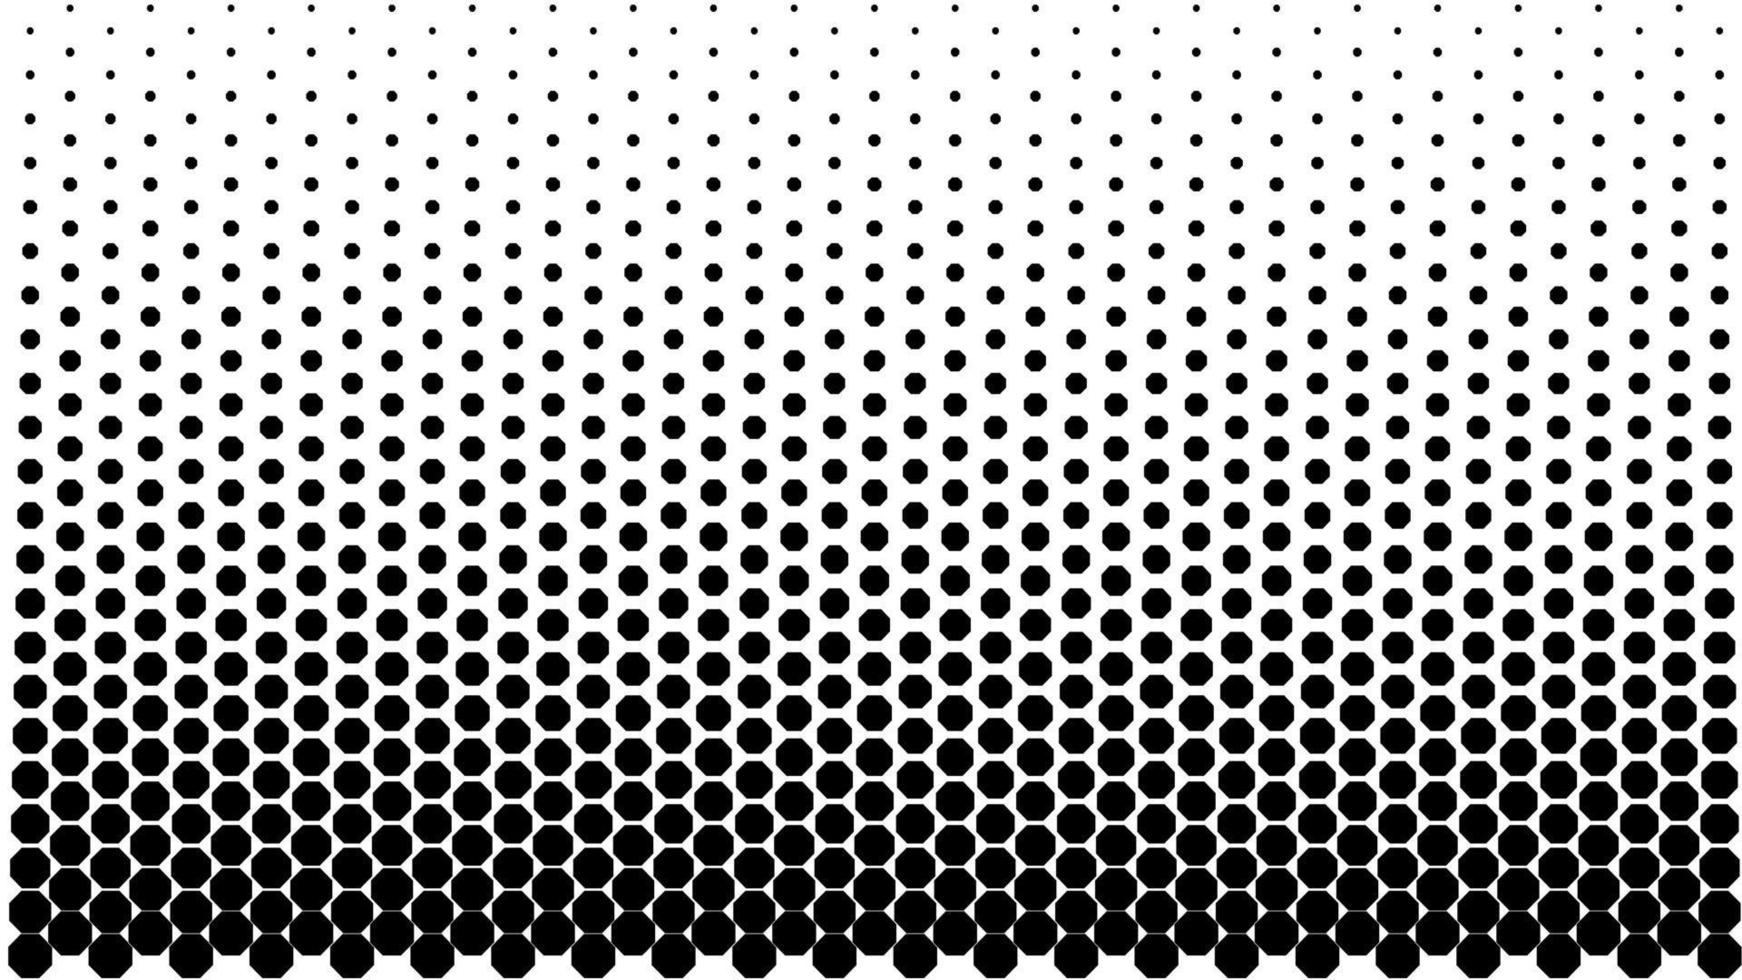 The octagon pattern halftones on white background vector